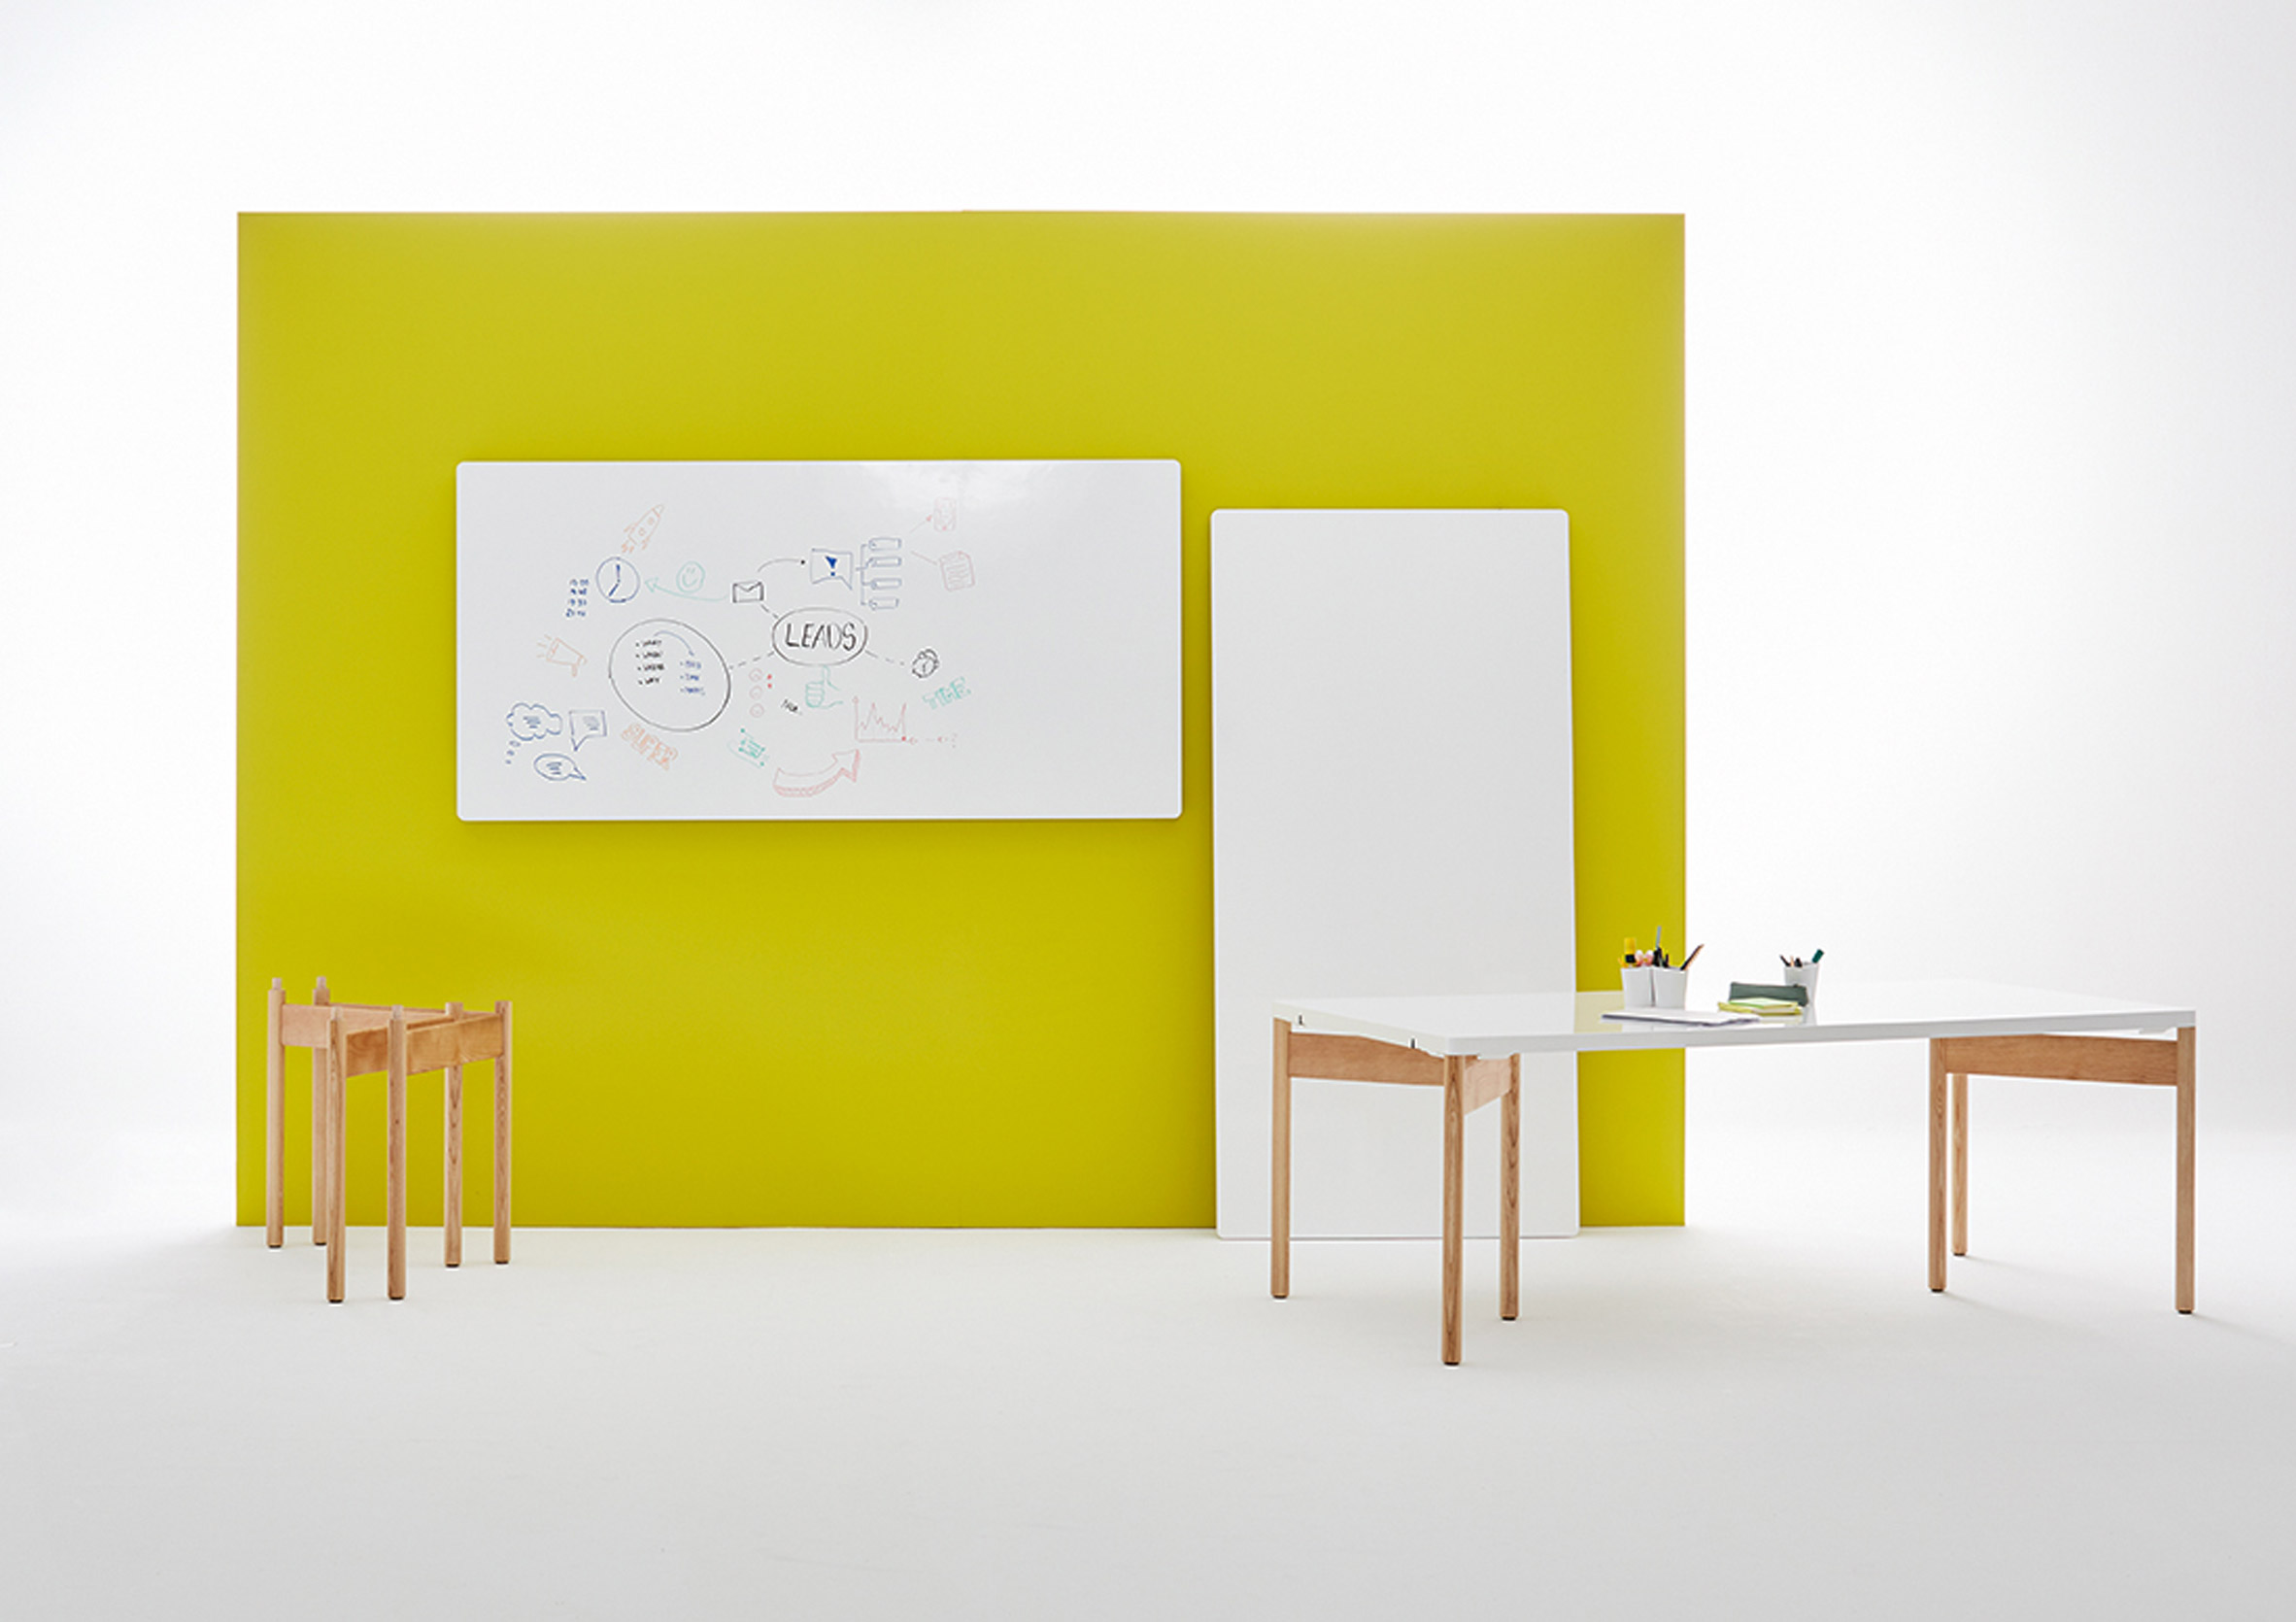 Moving Walls' latest office table doubles up as a wall writing panel